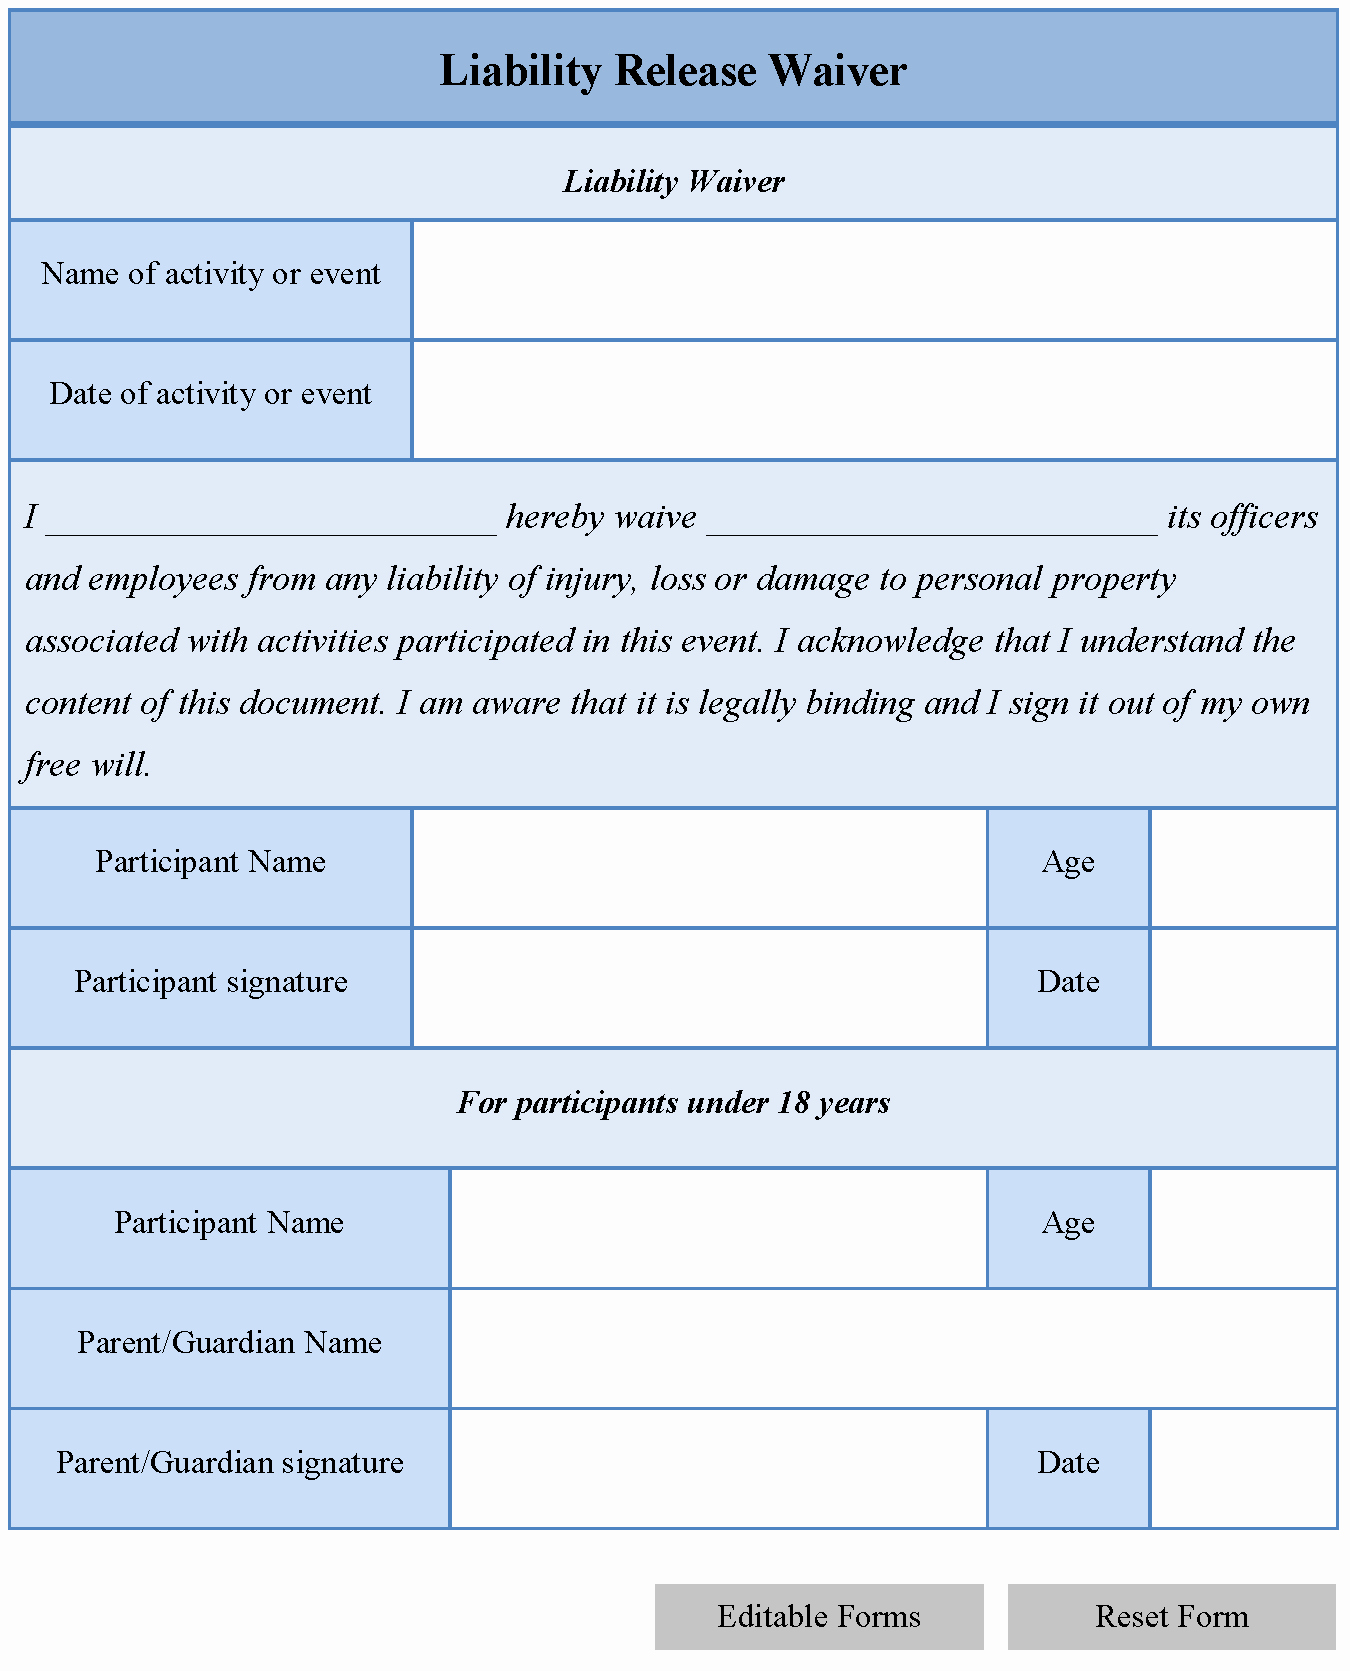 Liability Waiver form Template Free Best Of General Liability Waiver form Free Printable Documents